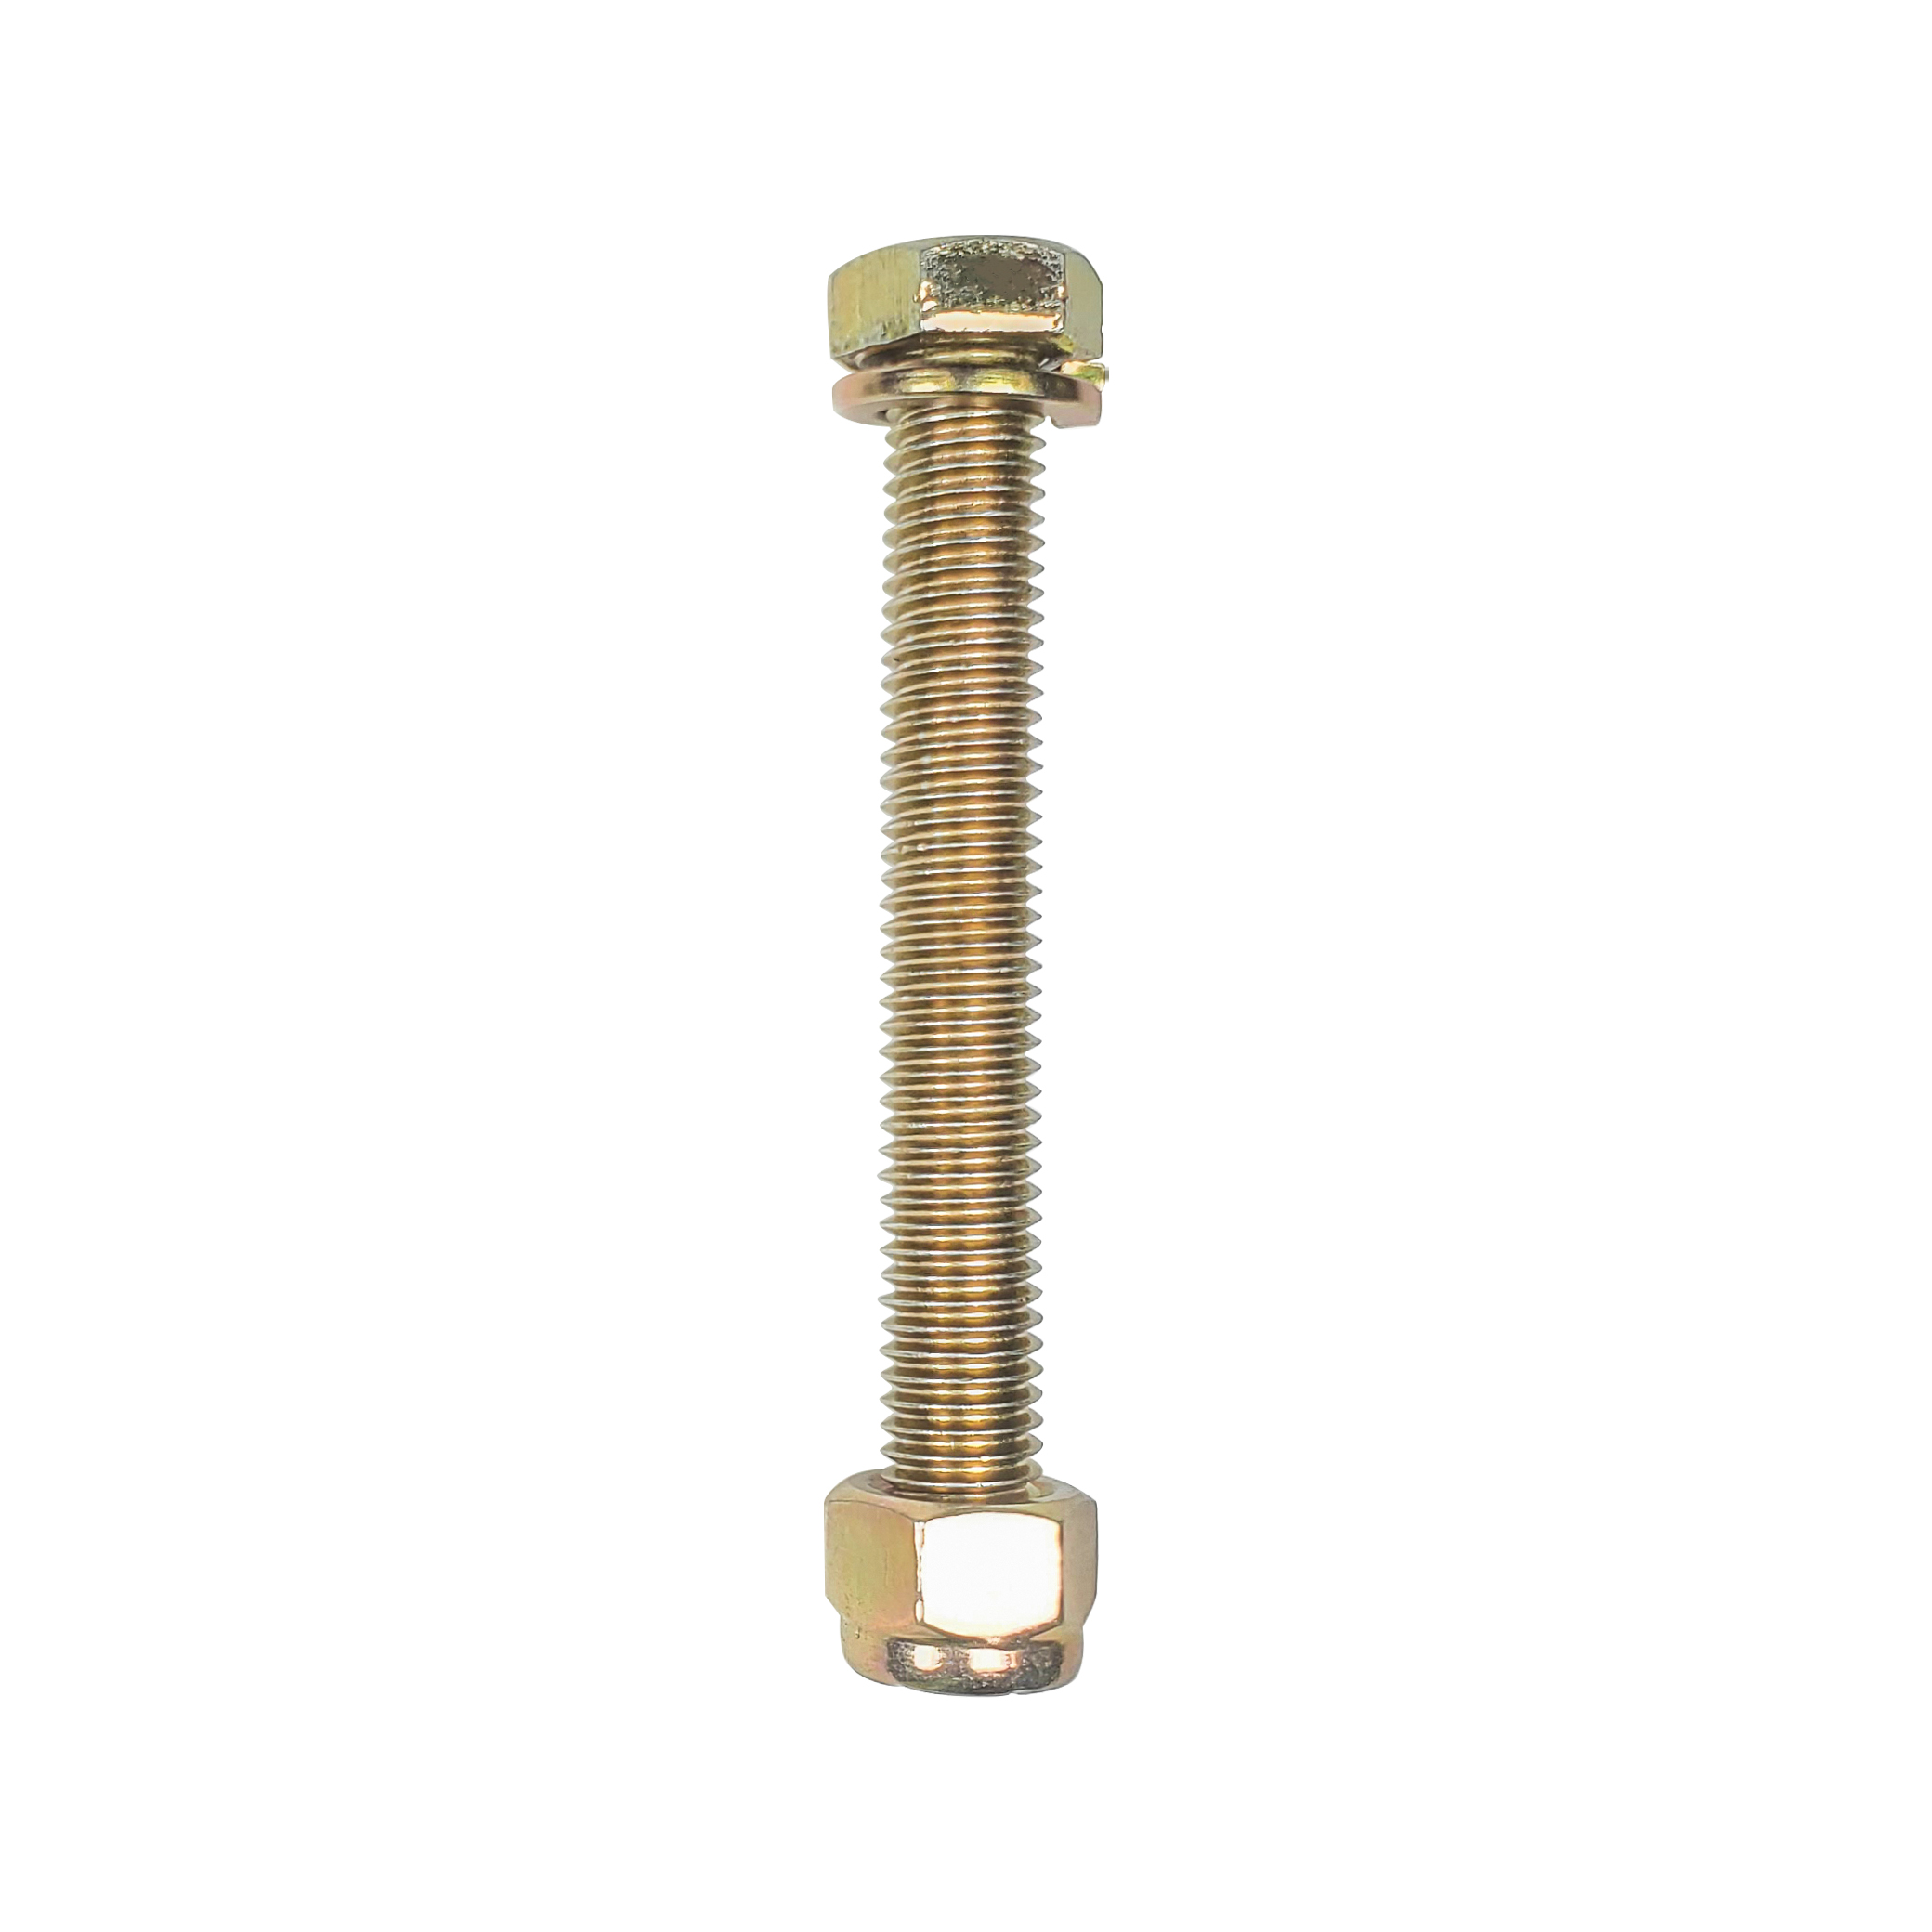 STB5K-RB ALPHA Swivel 5k Steel Anchor - Replacement Bolt